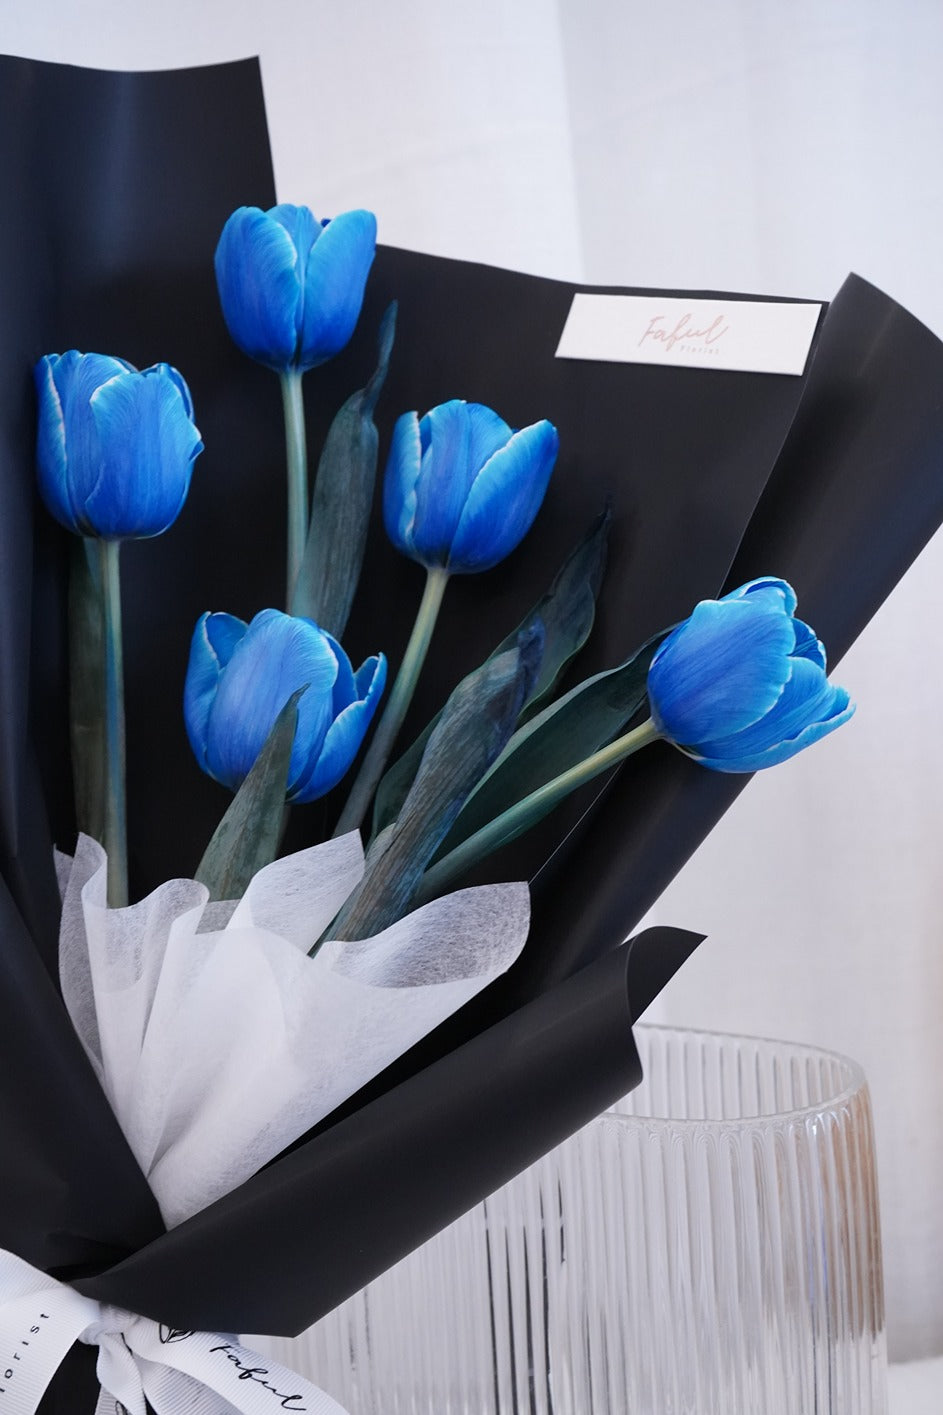 "Delft Blue Tulip Flowers" - A captivating arrangement showcasing Delft blue tulips, perfect flowers for flower delivery in Hong Kong.2